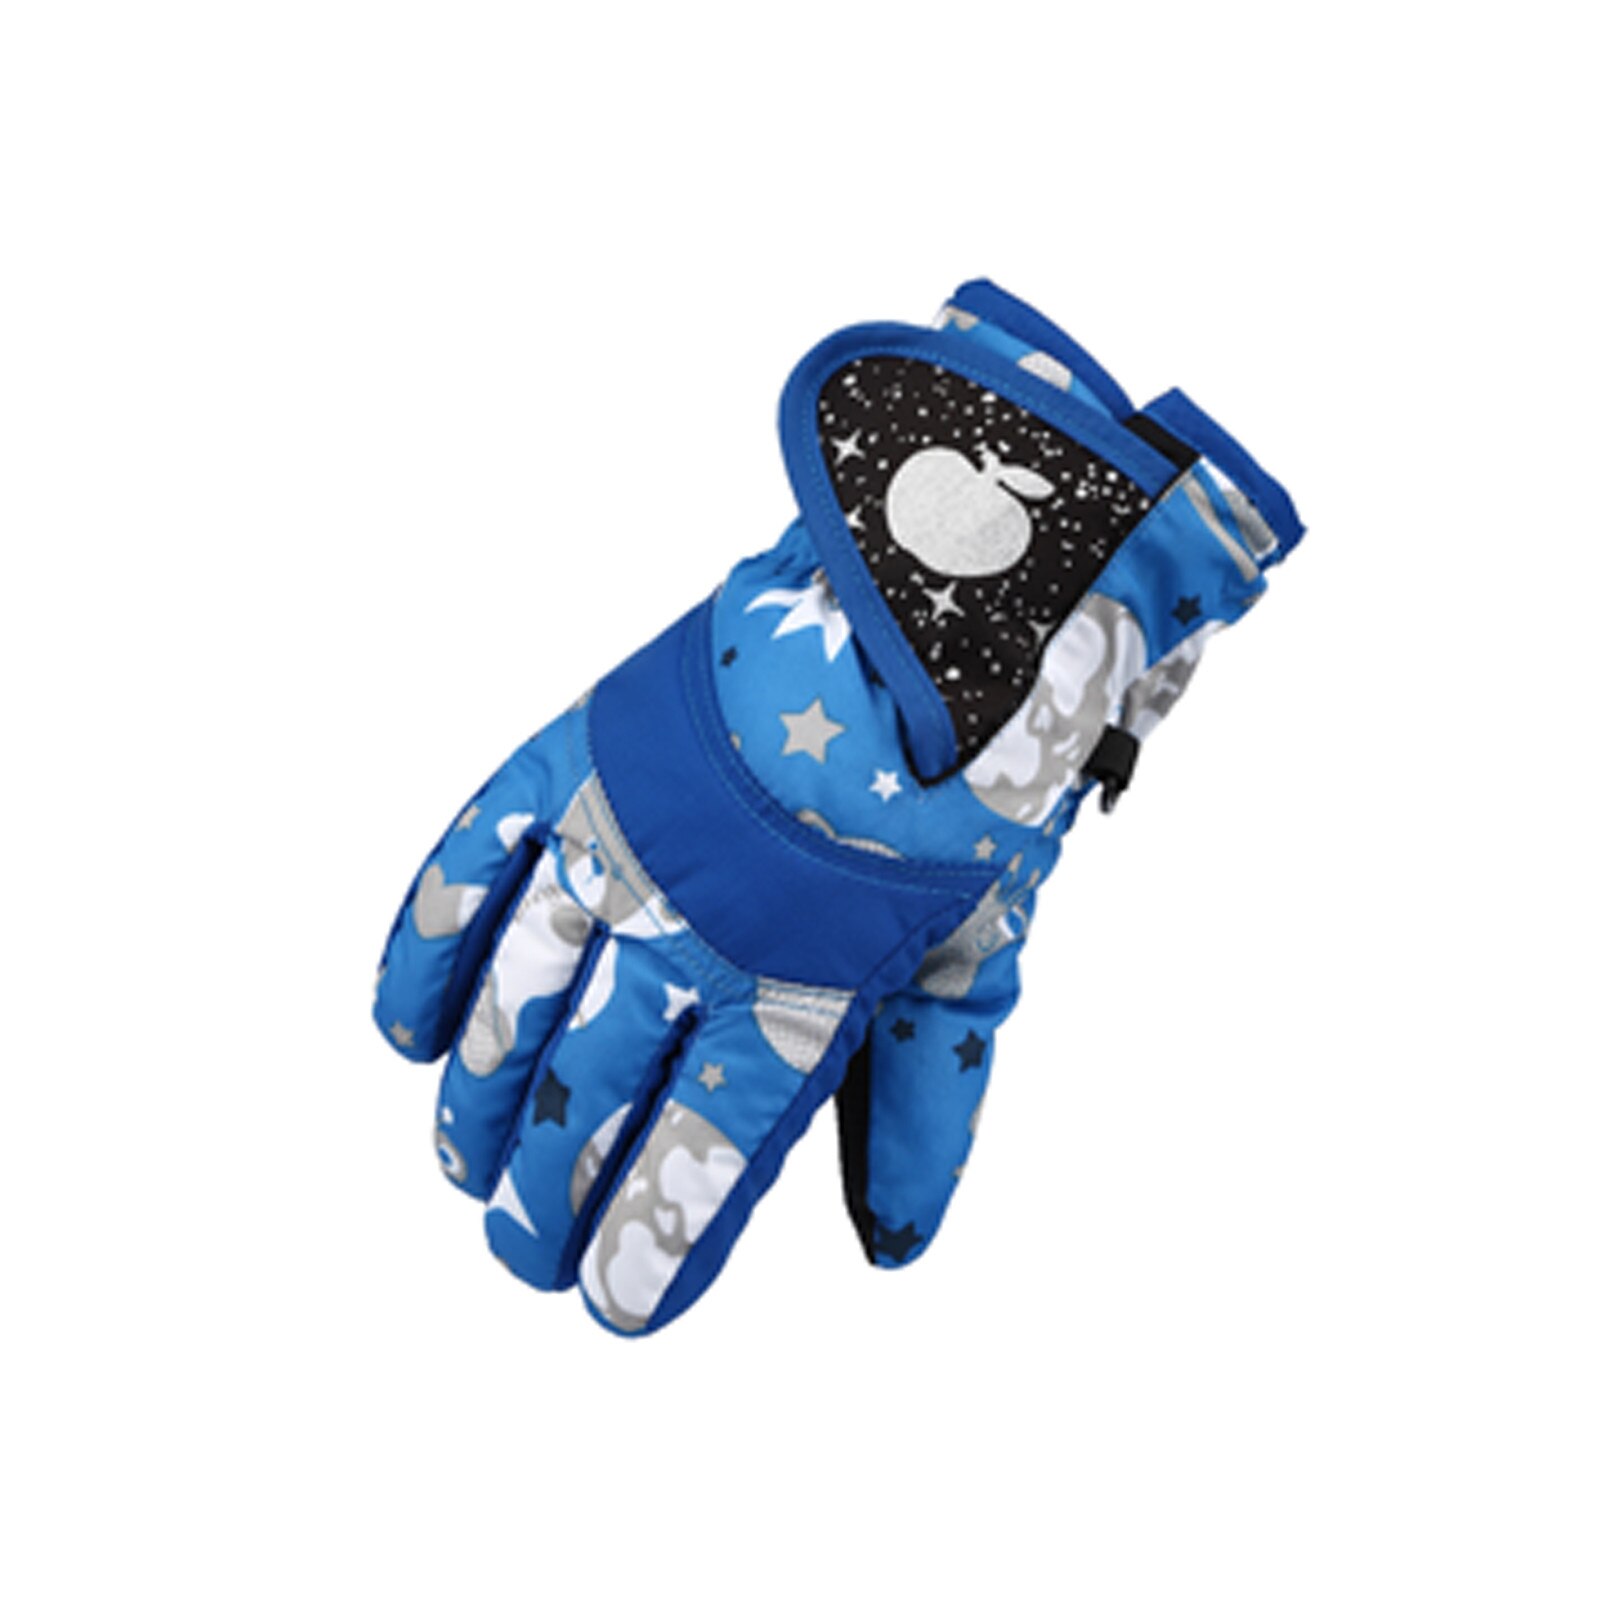 Newest Winter Gloves for Kids Boys Girls Snow Windproof Mittens Outdoor Sports Skiing